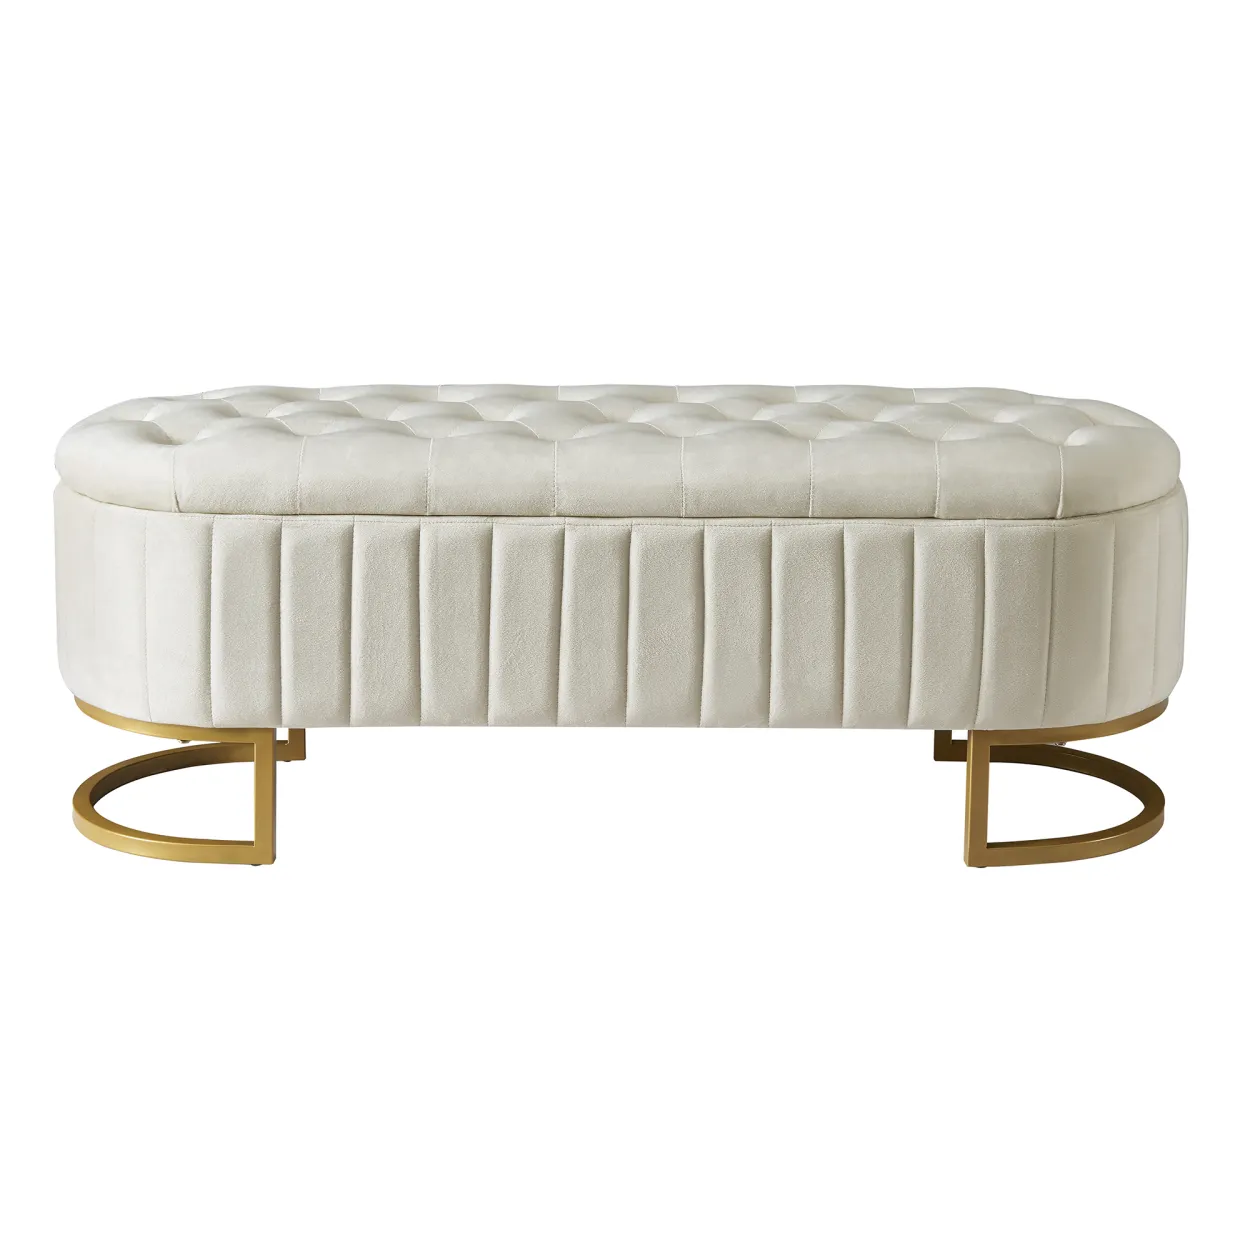 Elegant Upholstered Velvet Storage Ottoman with Button-Tufted, Storage Bench with Metal Legs for Bedroom, Living Room, Fully Assembled Except Legs, Beige